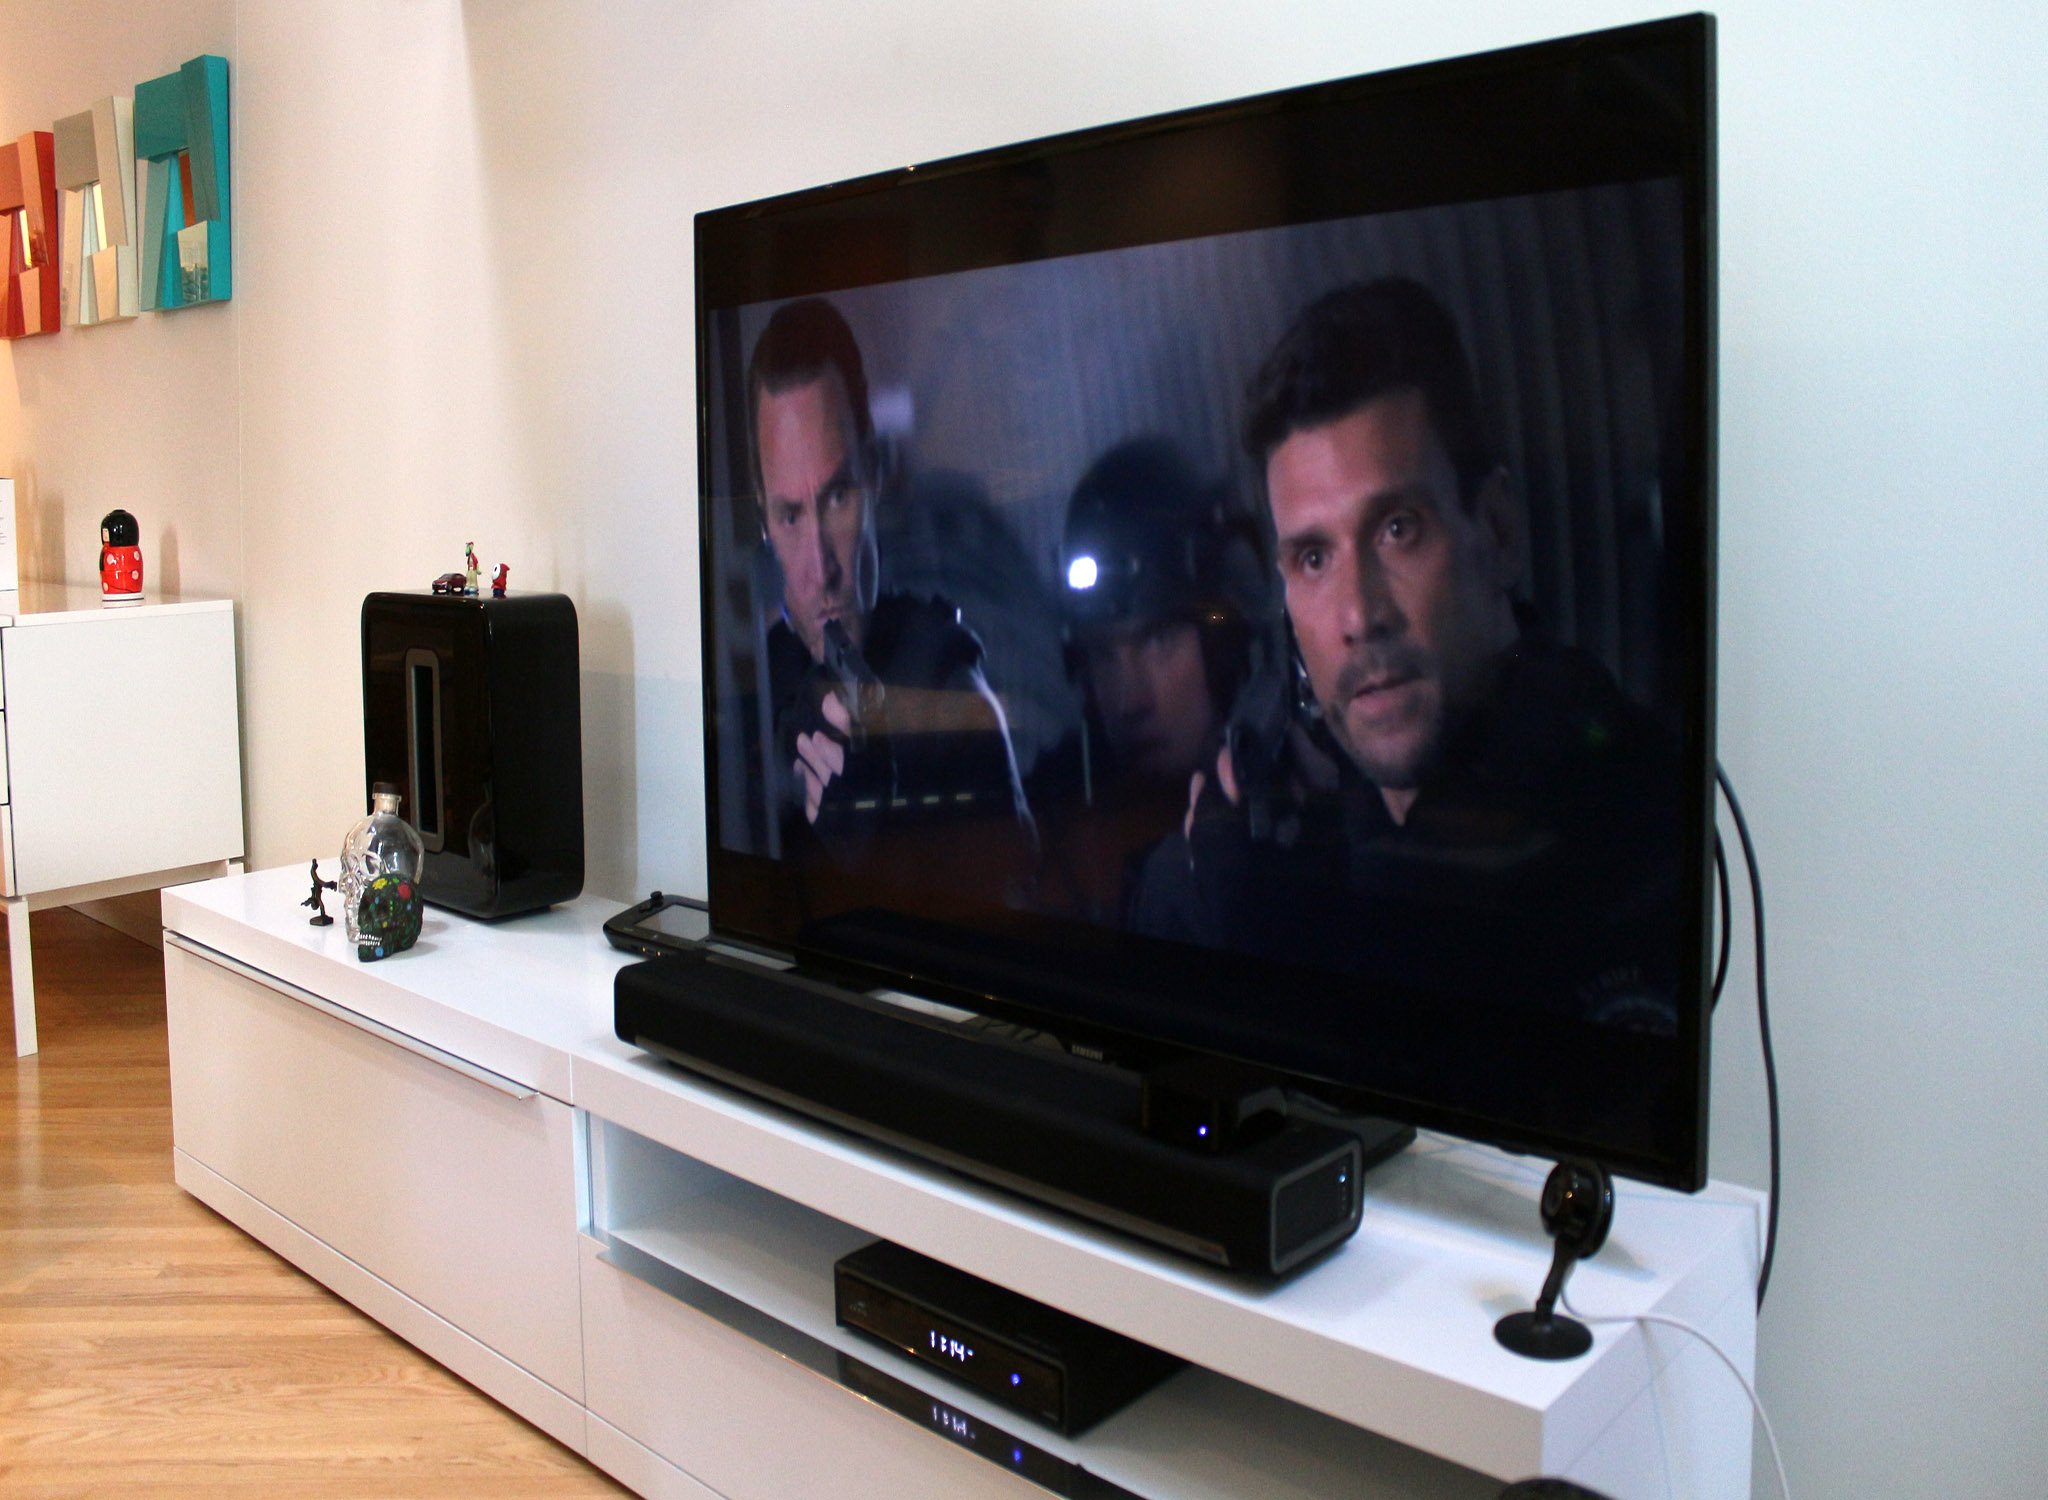 Should you get a Sonos home theater?